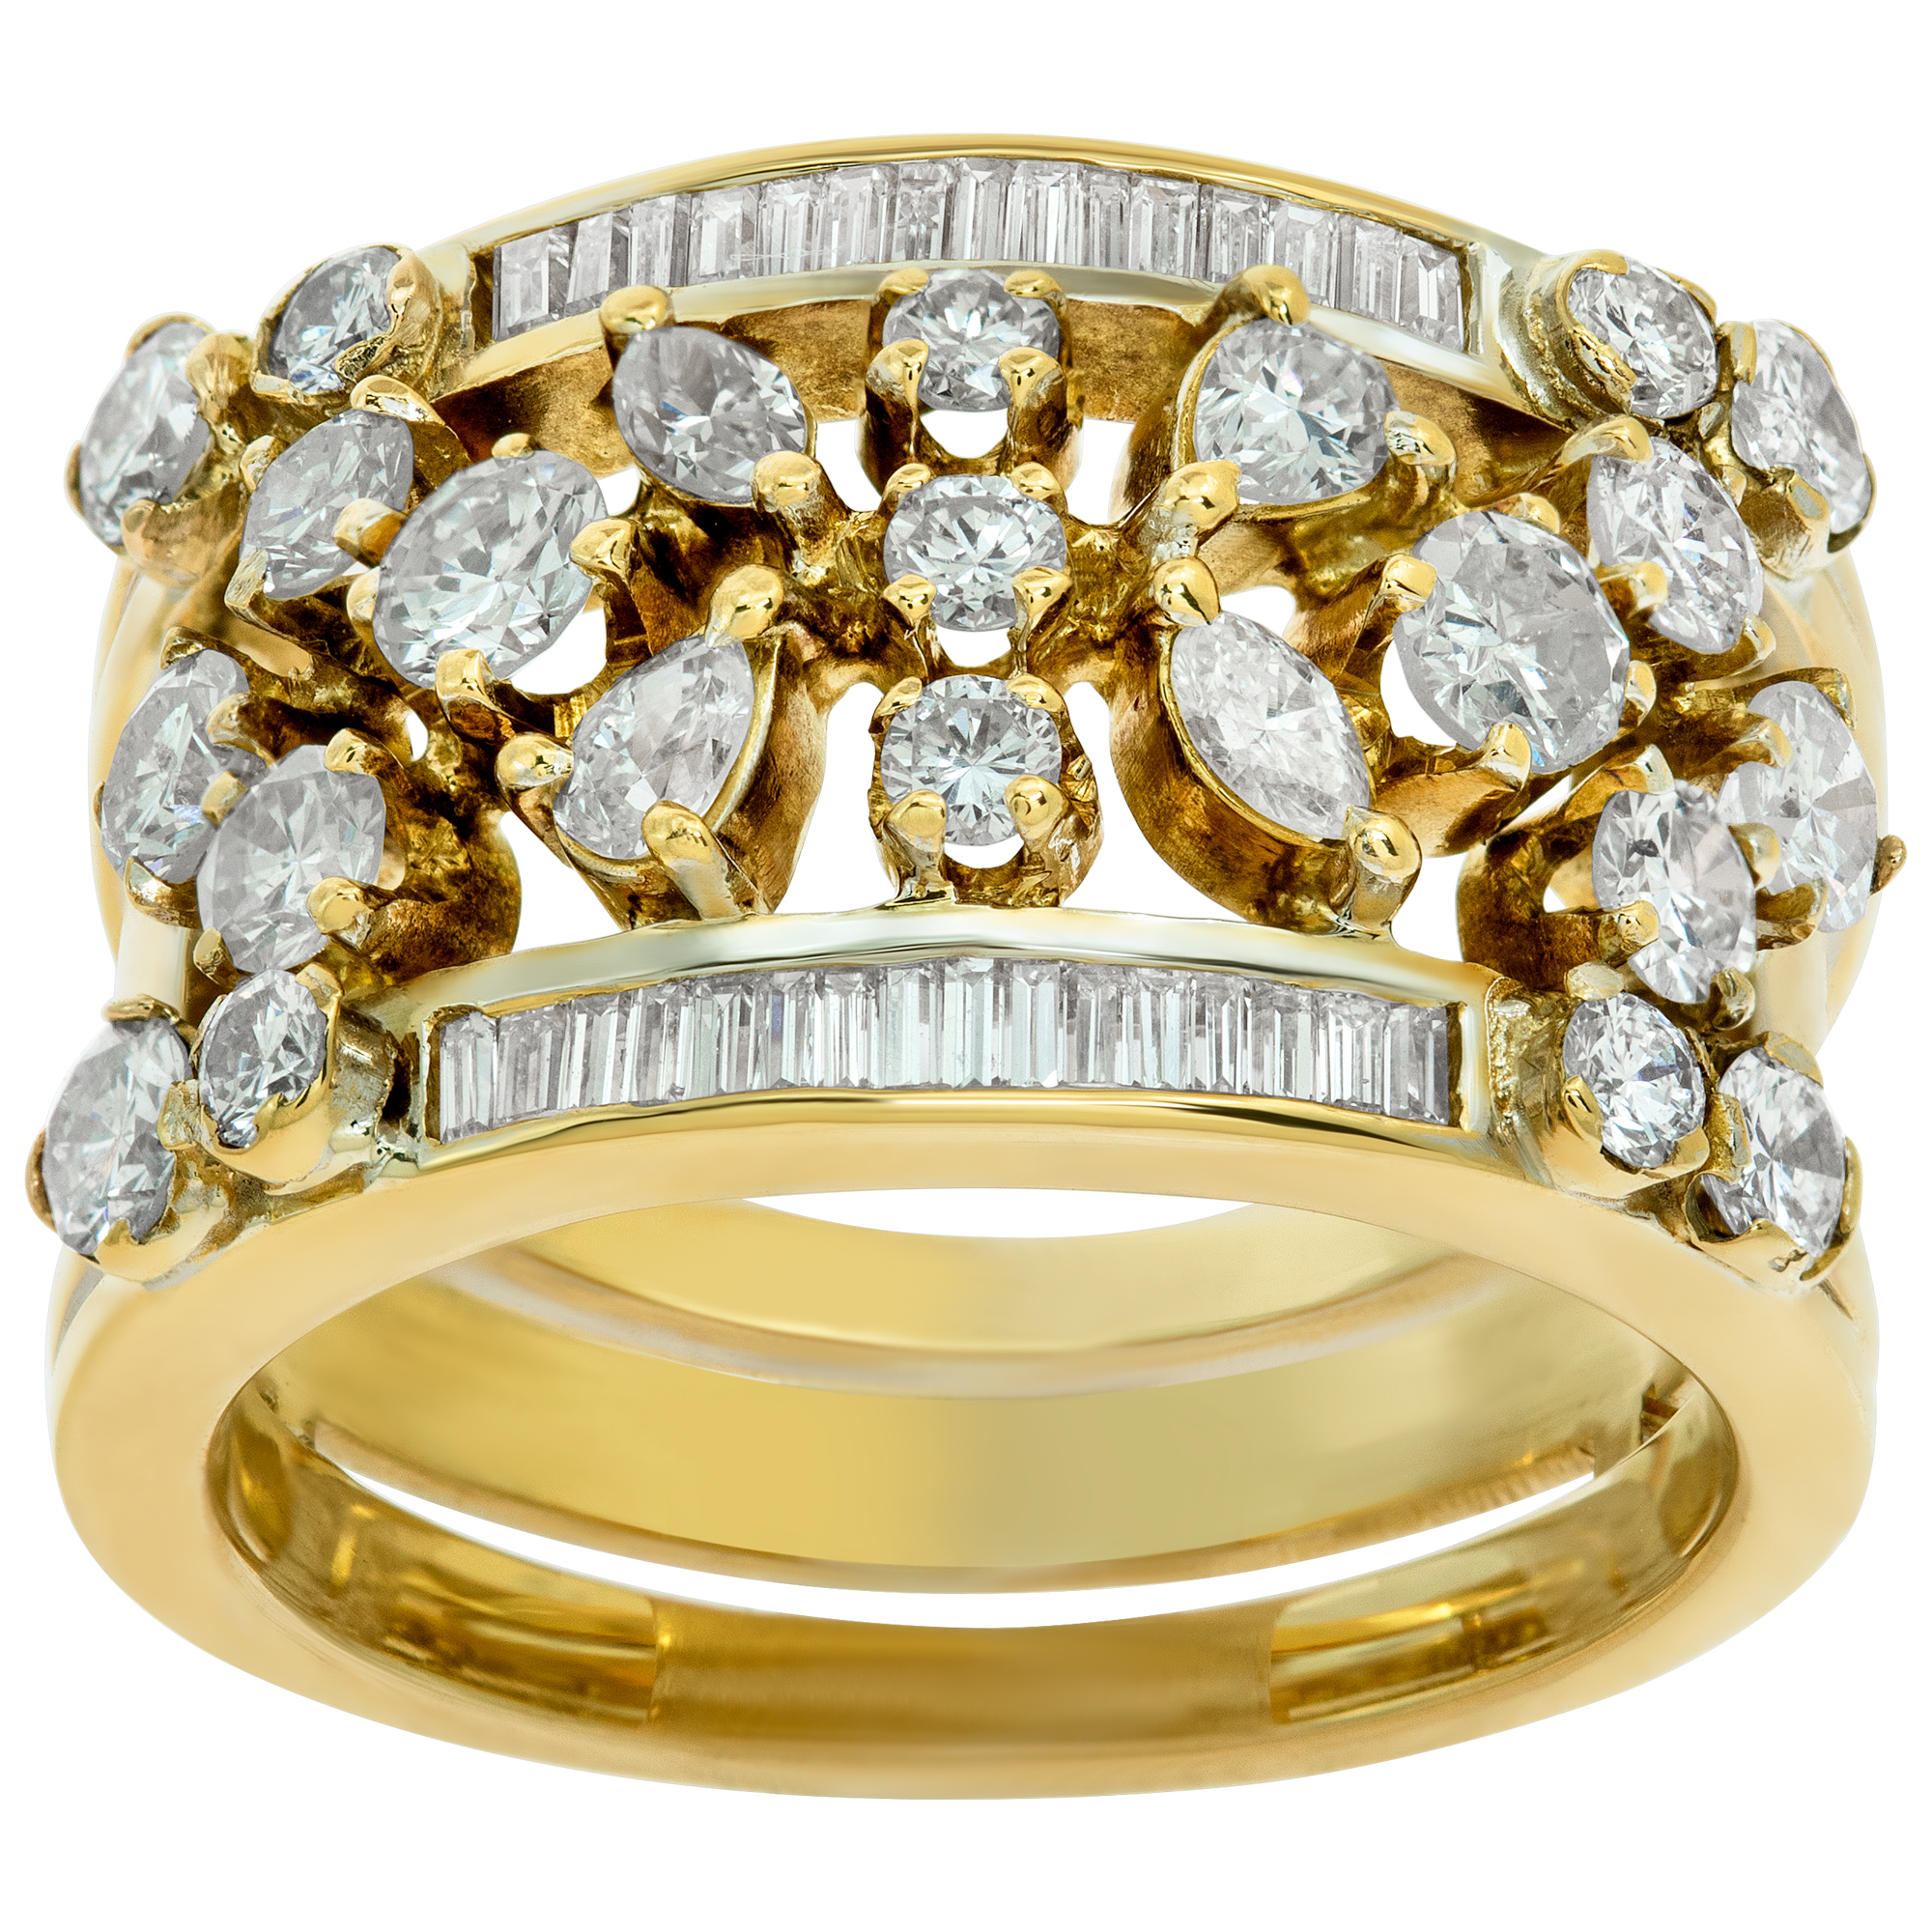 Marquise, pear, baguette and round brilliant cut diamonds ring in 18k yellow gold.